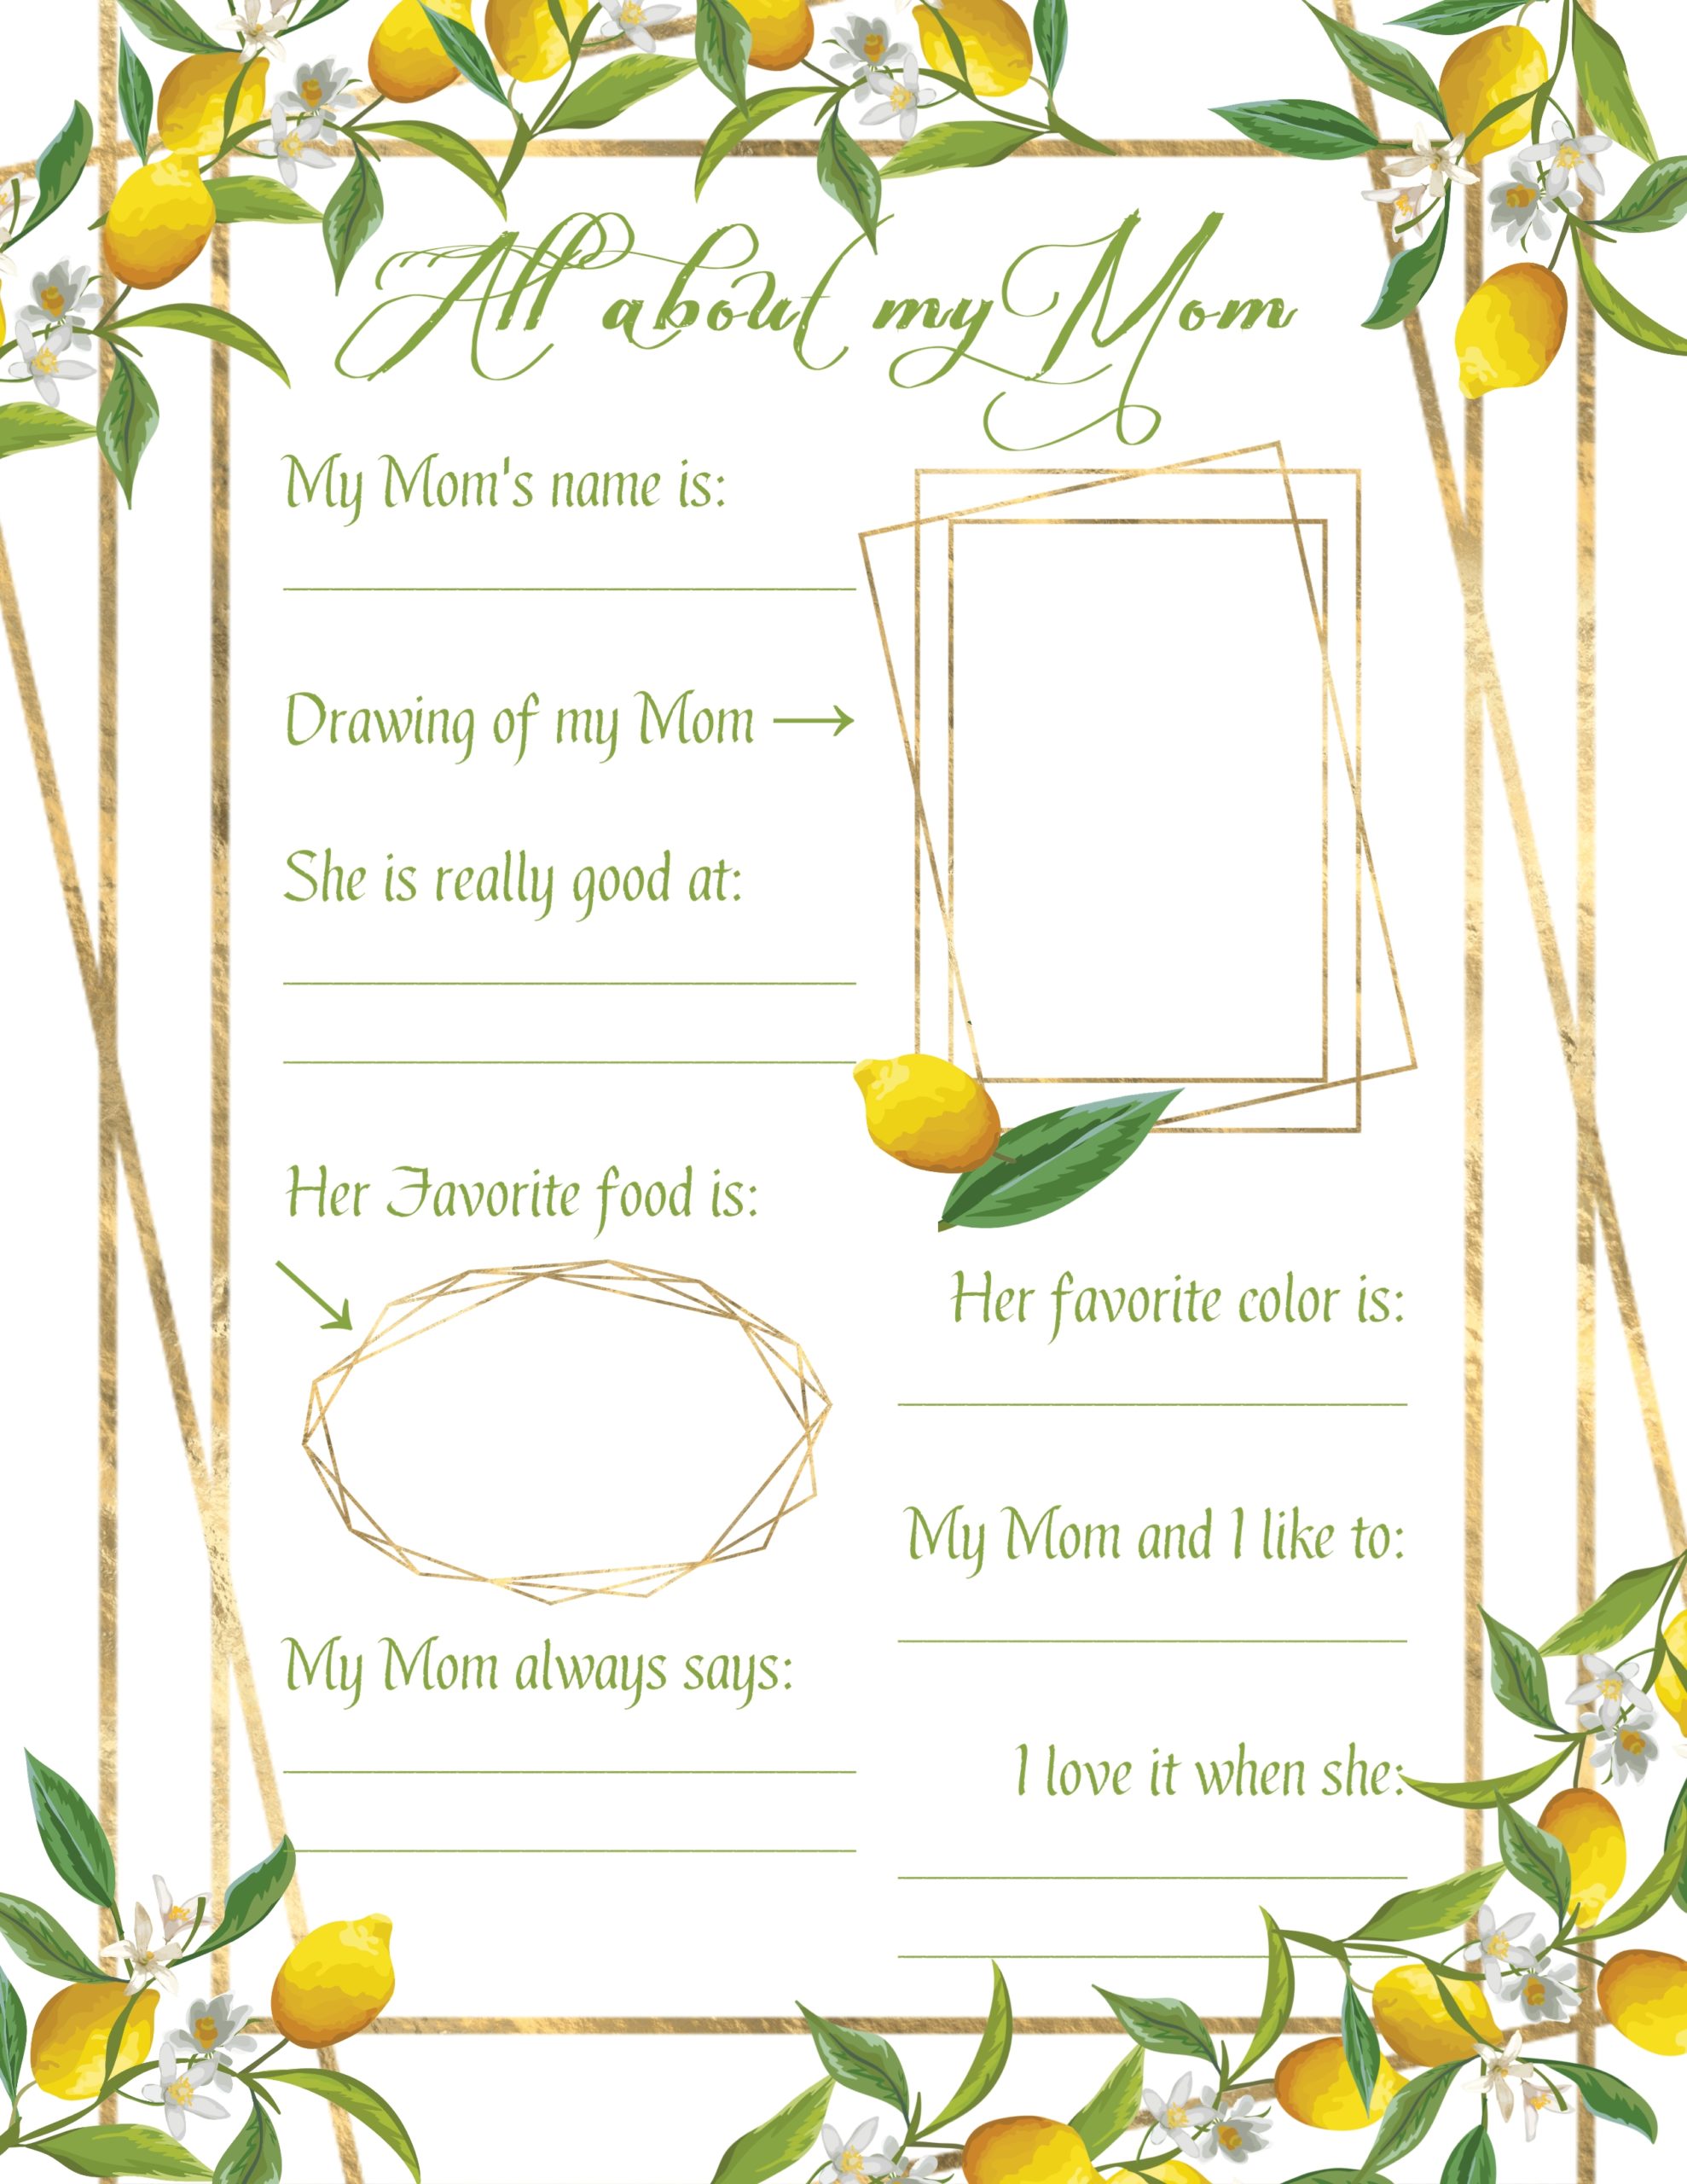 Free Mother's Day Questionnaire Printable on Pretty My Party